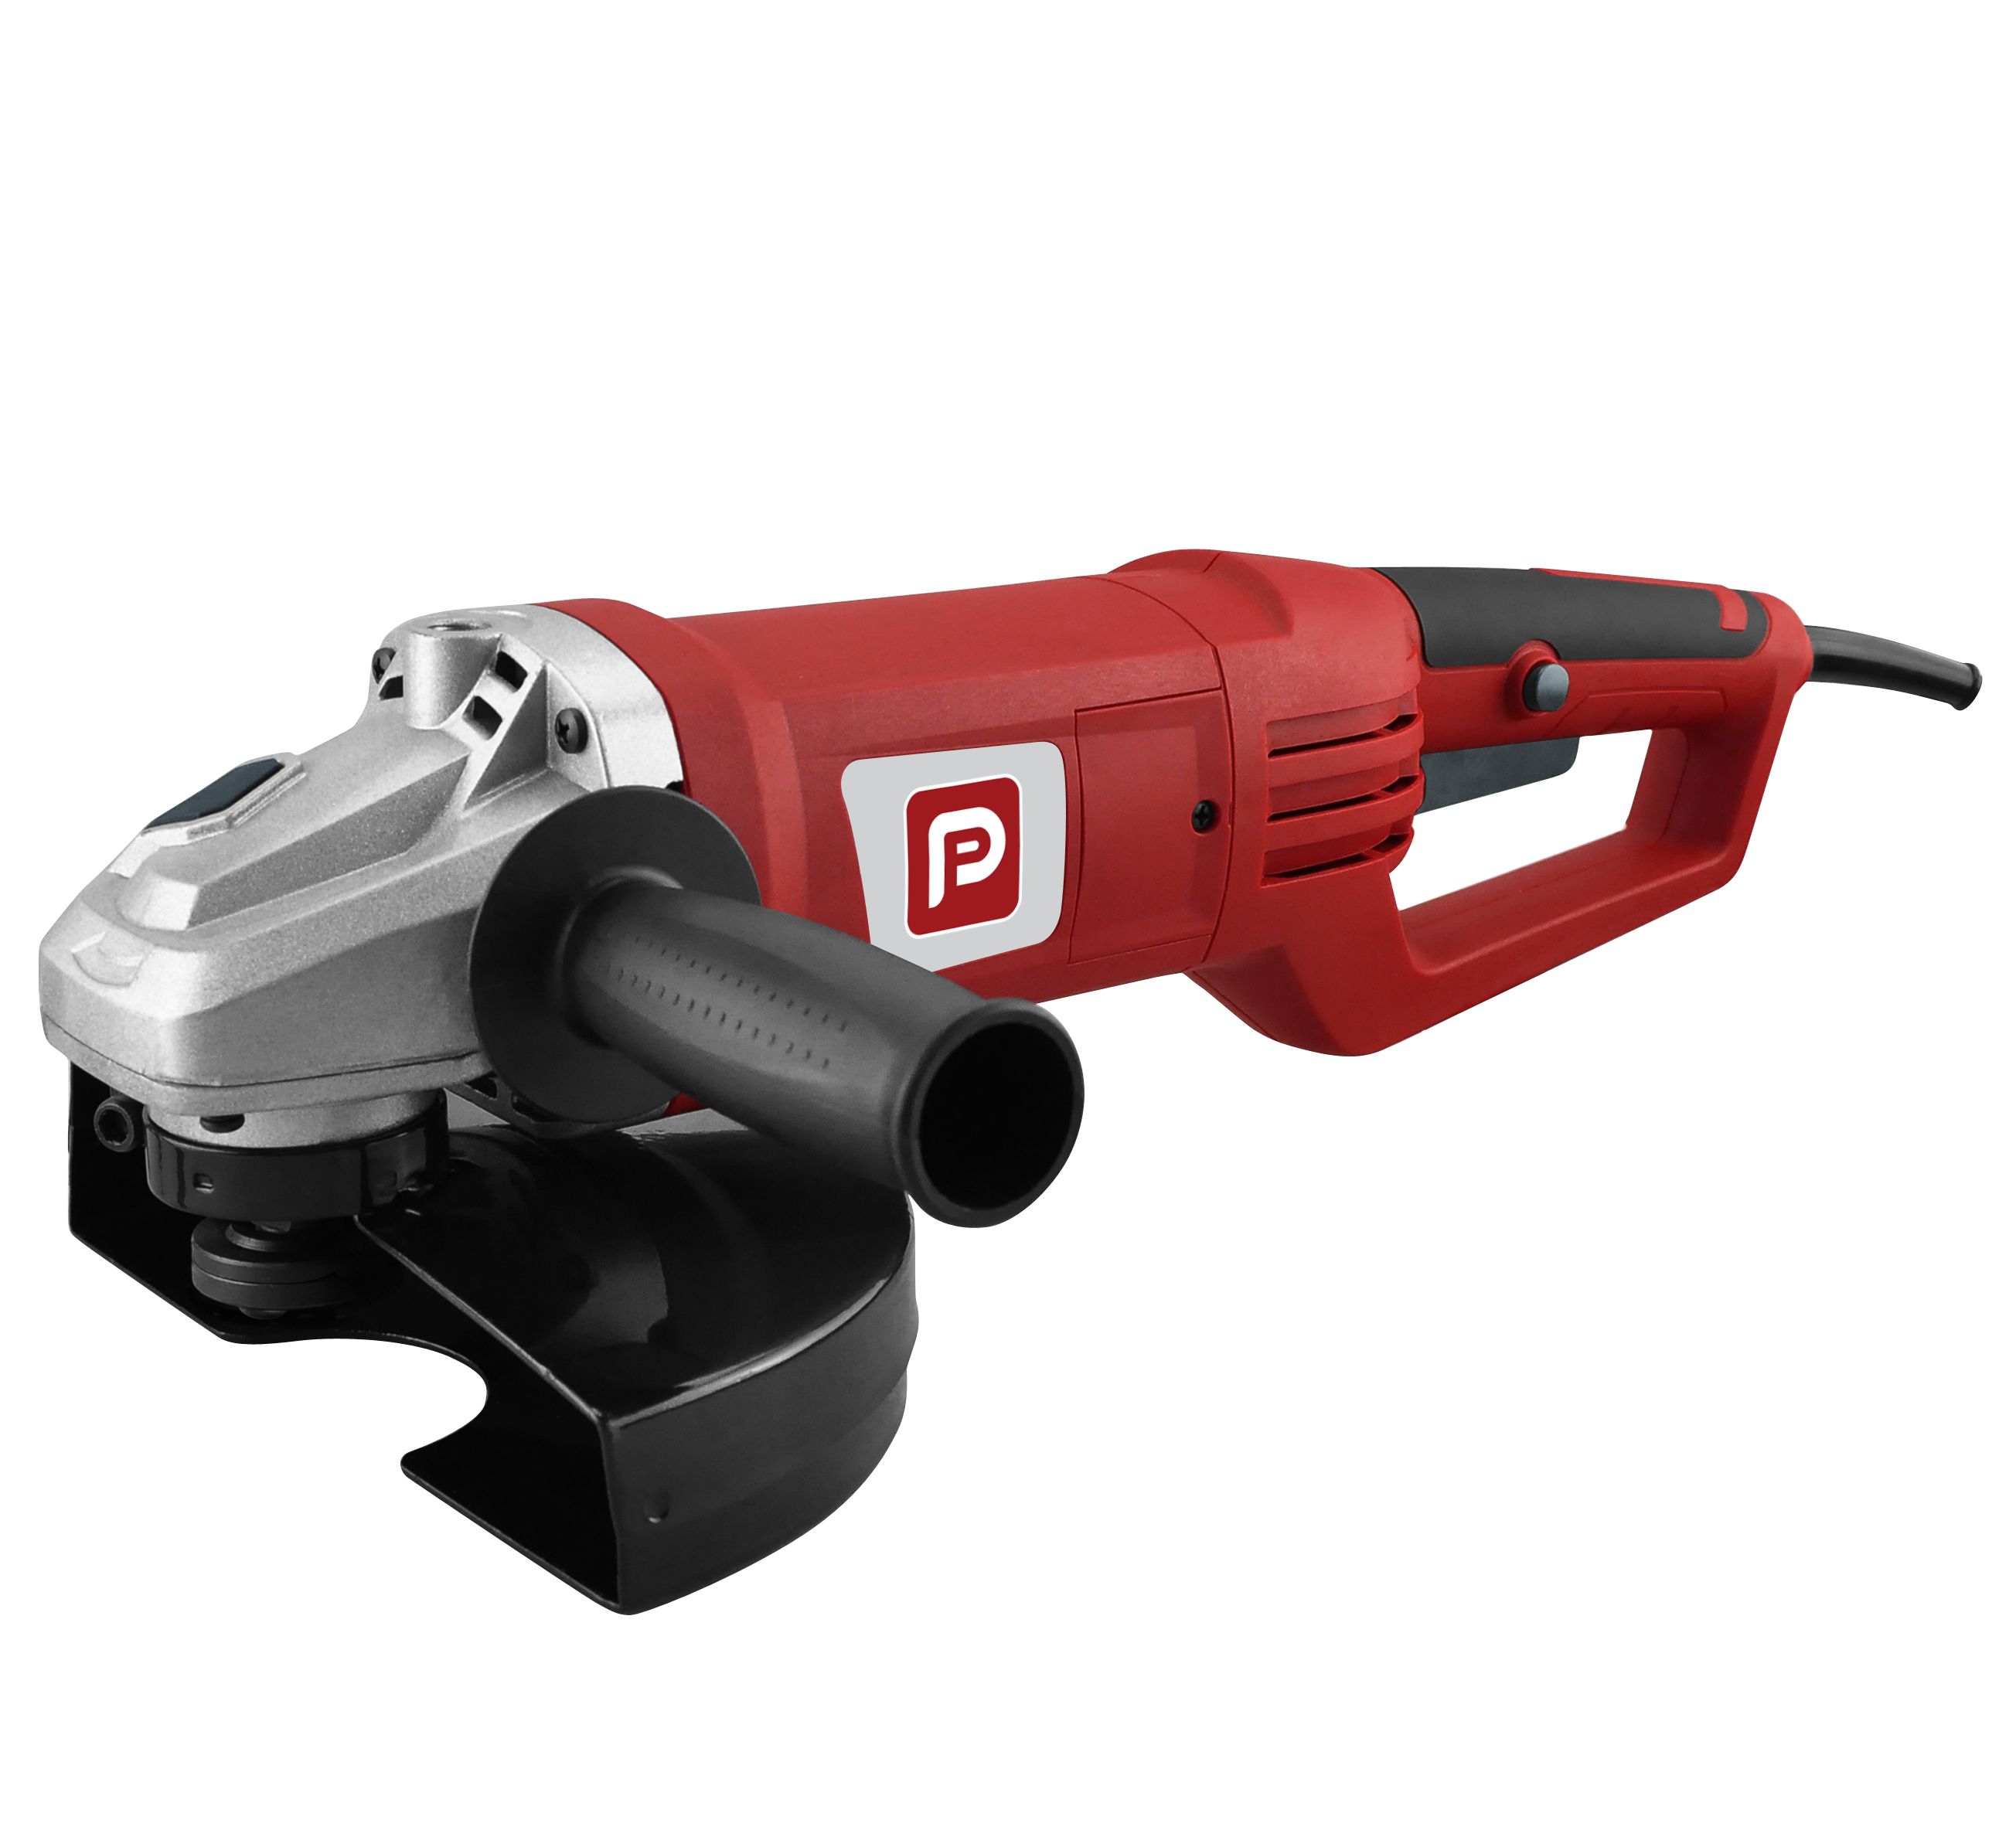 Performance Power 2000W 240V 230mm Corded Angle Grinder Pag2000C